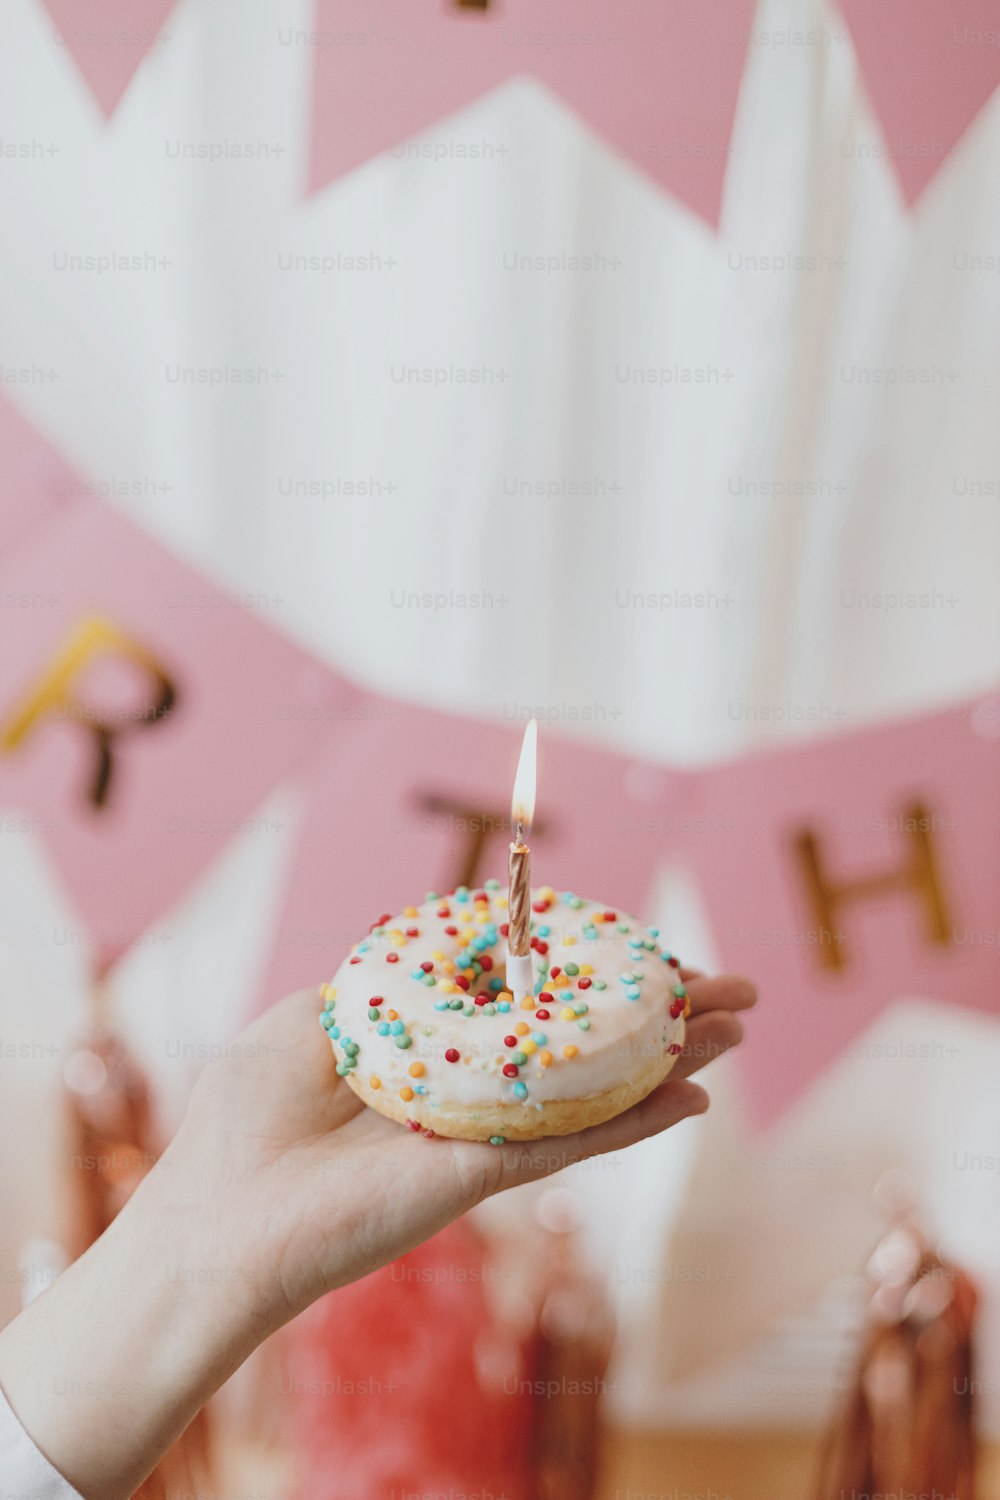 Delicious birthday donut with candle in hand on background of pink garland and decorations in festive room. Celebrating birthday party. Colorful doughnut with sprinkles and rose gold candle